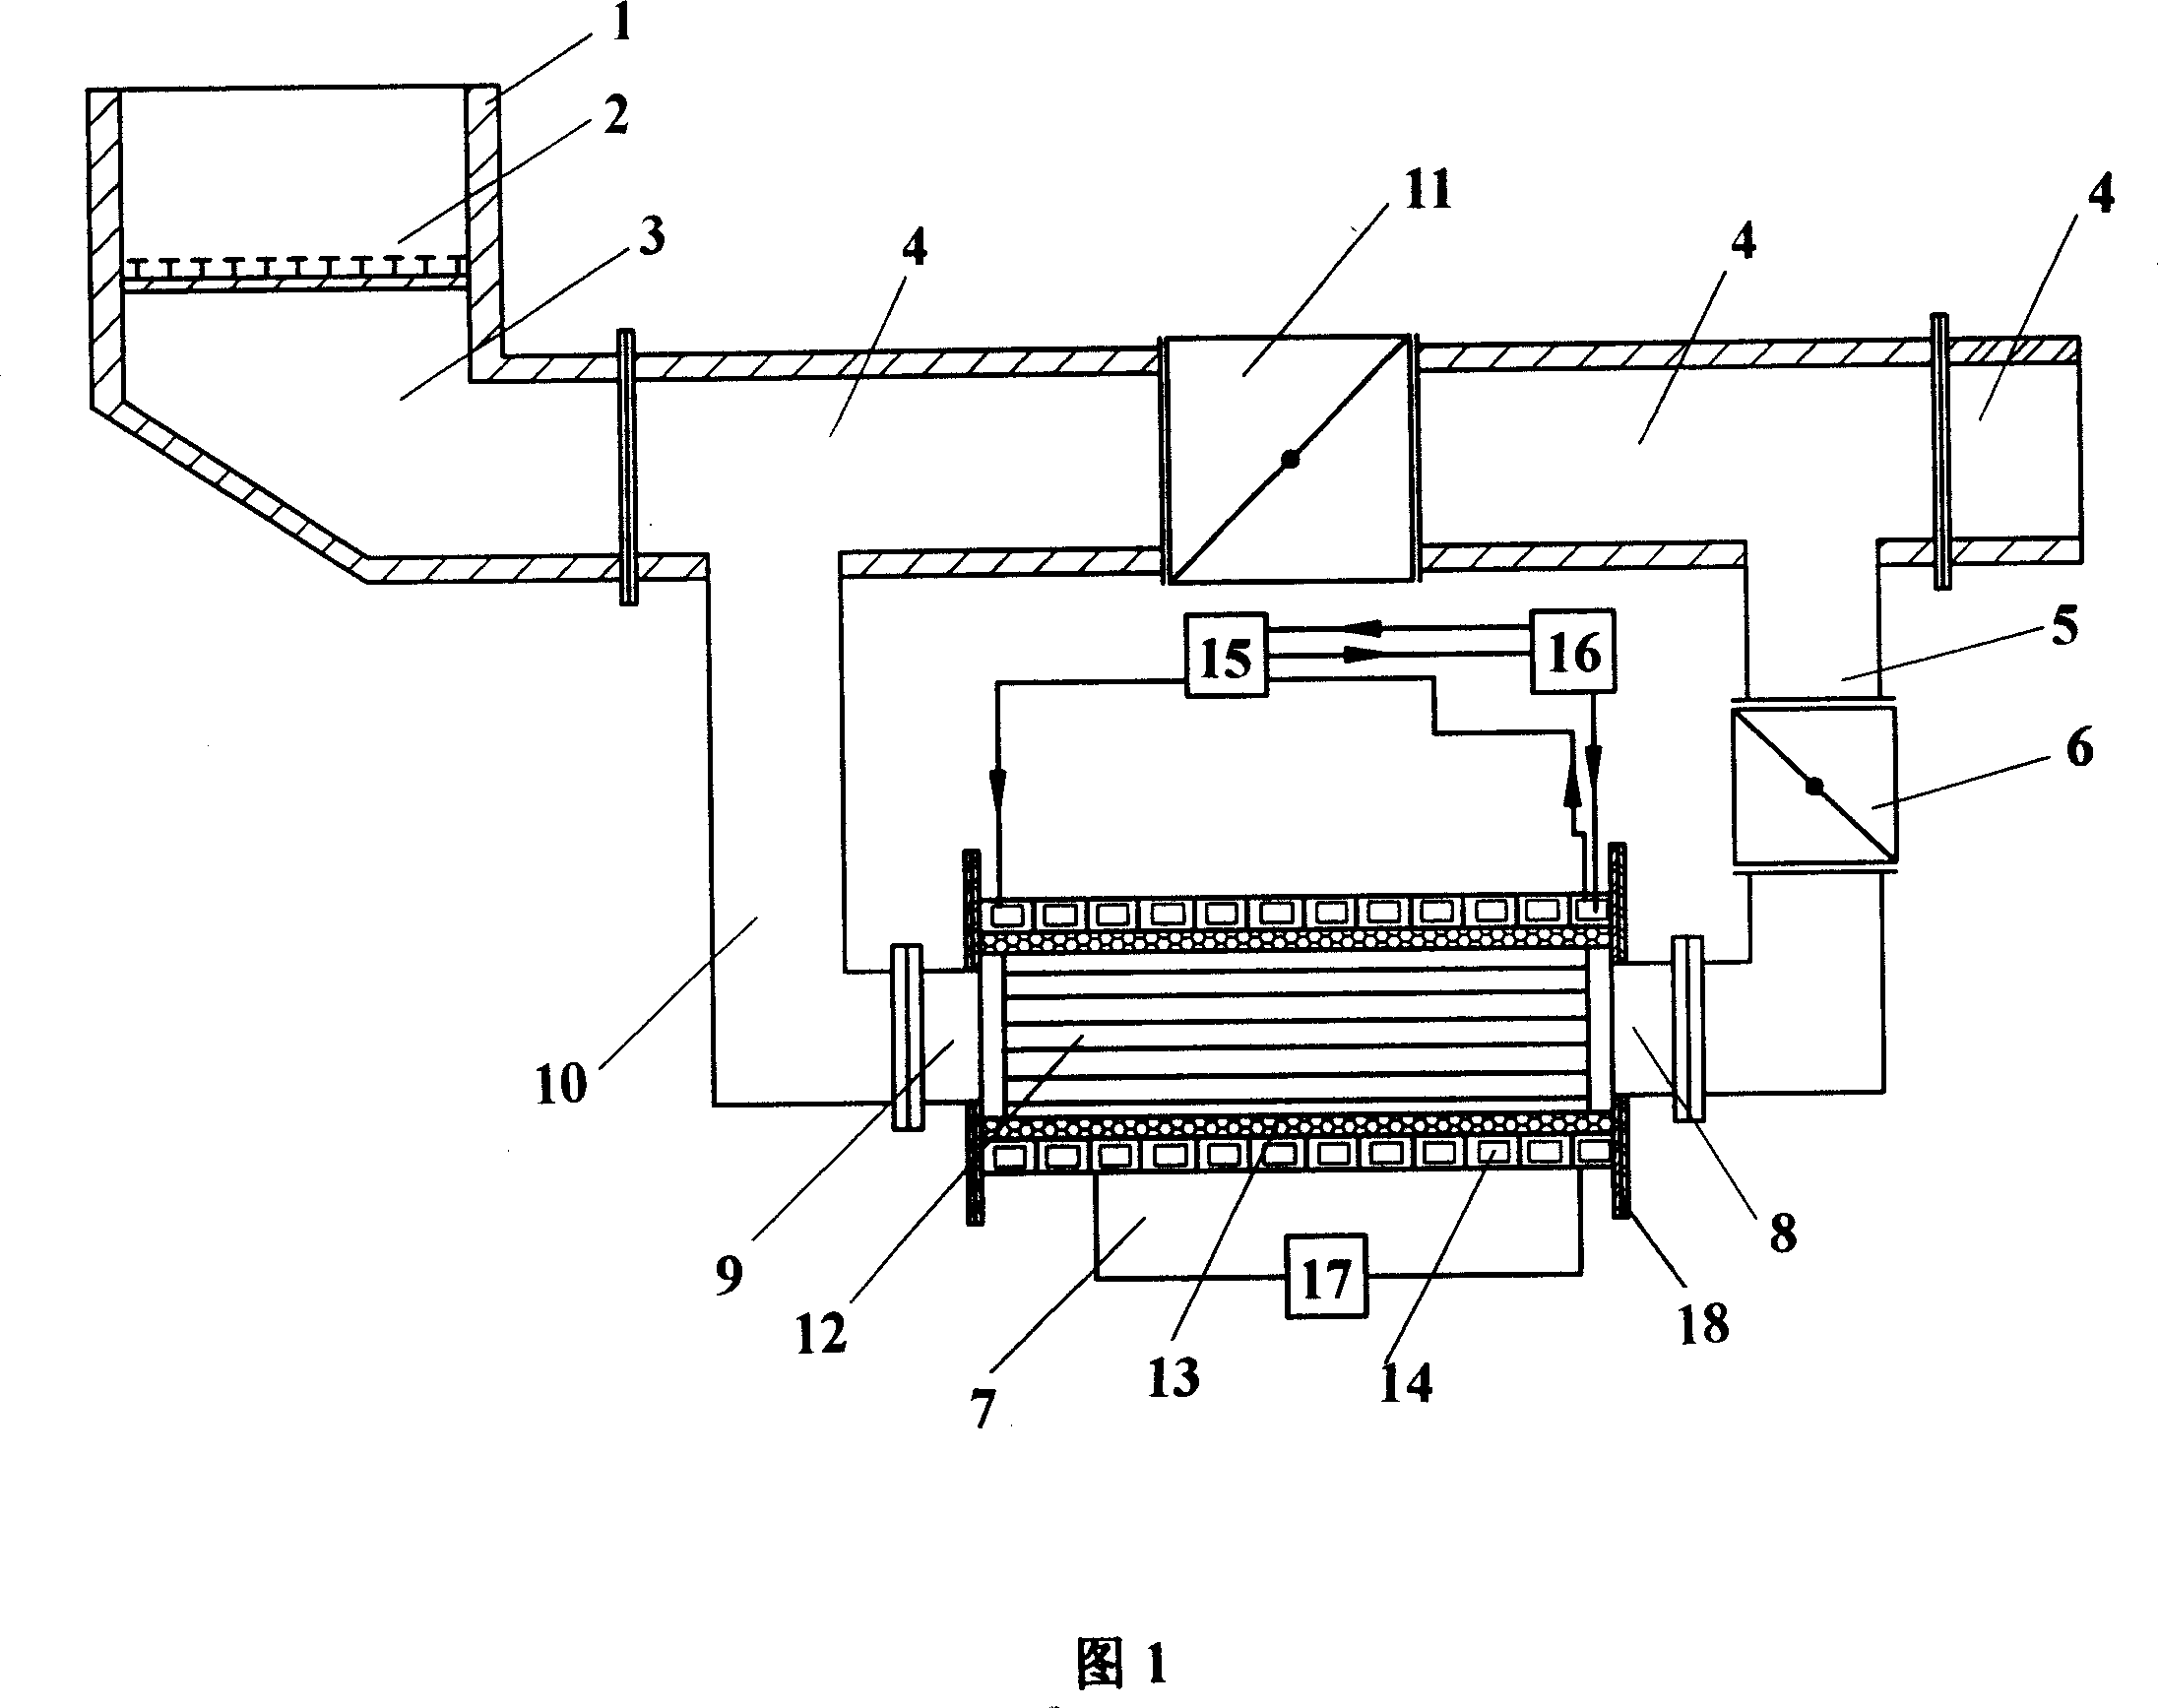 High-temperature air lighting system under bed for fluidized bed and circulating fluidized bed boiler